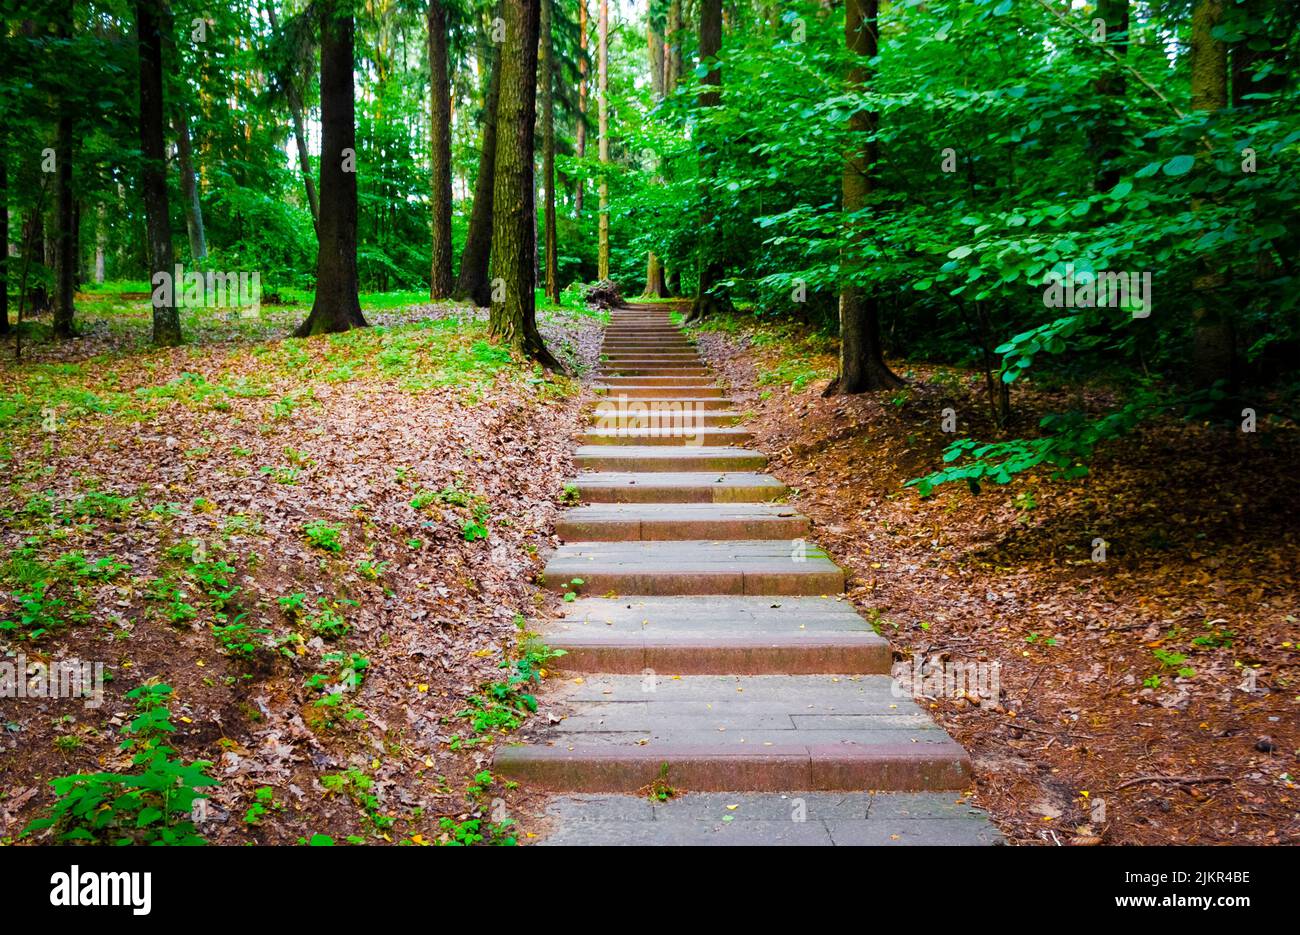 Staircase in the forest surrounded by large trees Stock Photo